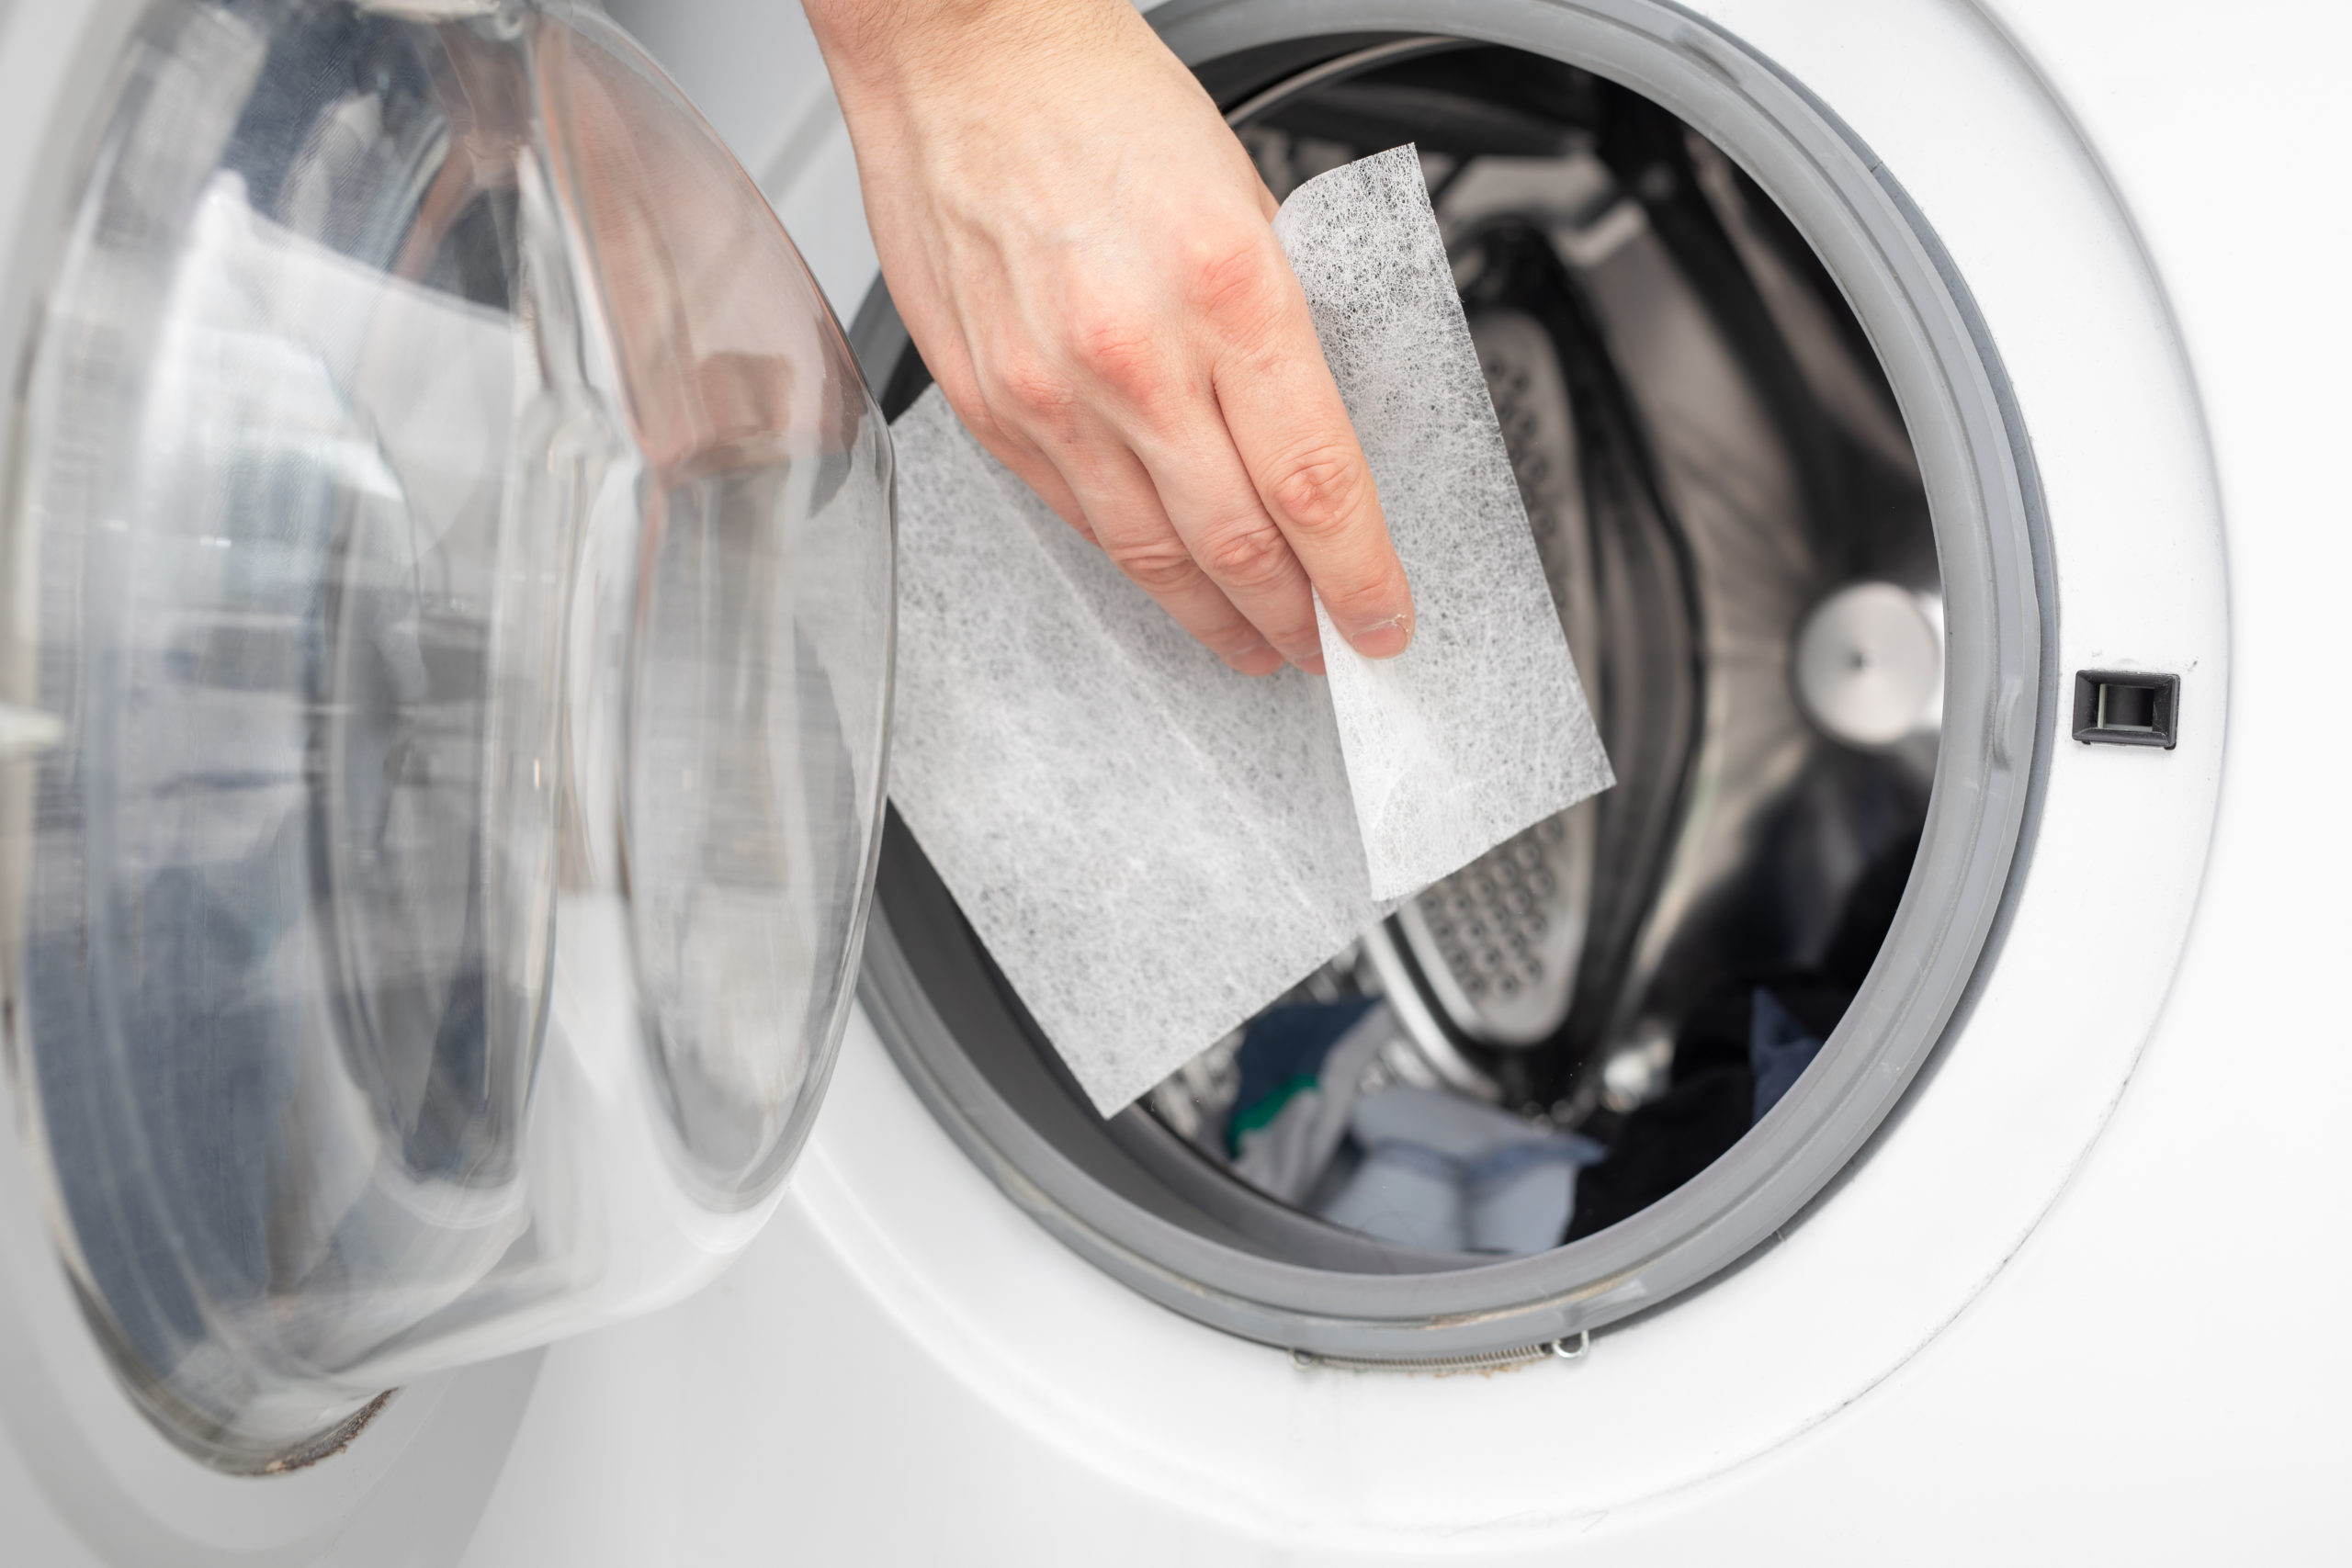 soft-your-laundry-by-droping-dryer-sheets-into-your-dryer-washing-mashine-by-hand-scaled